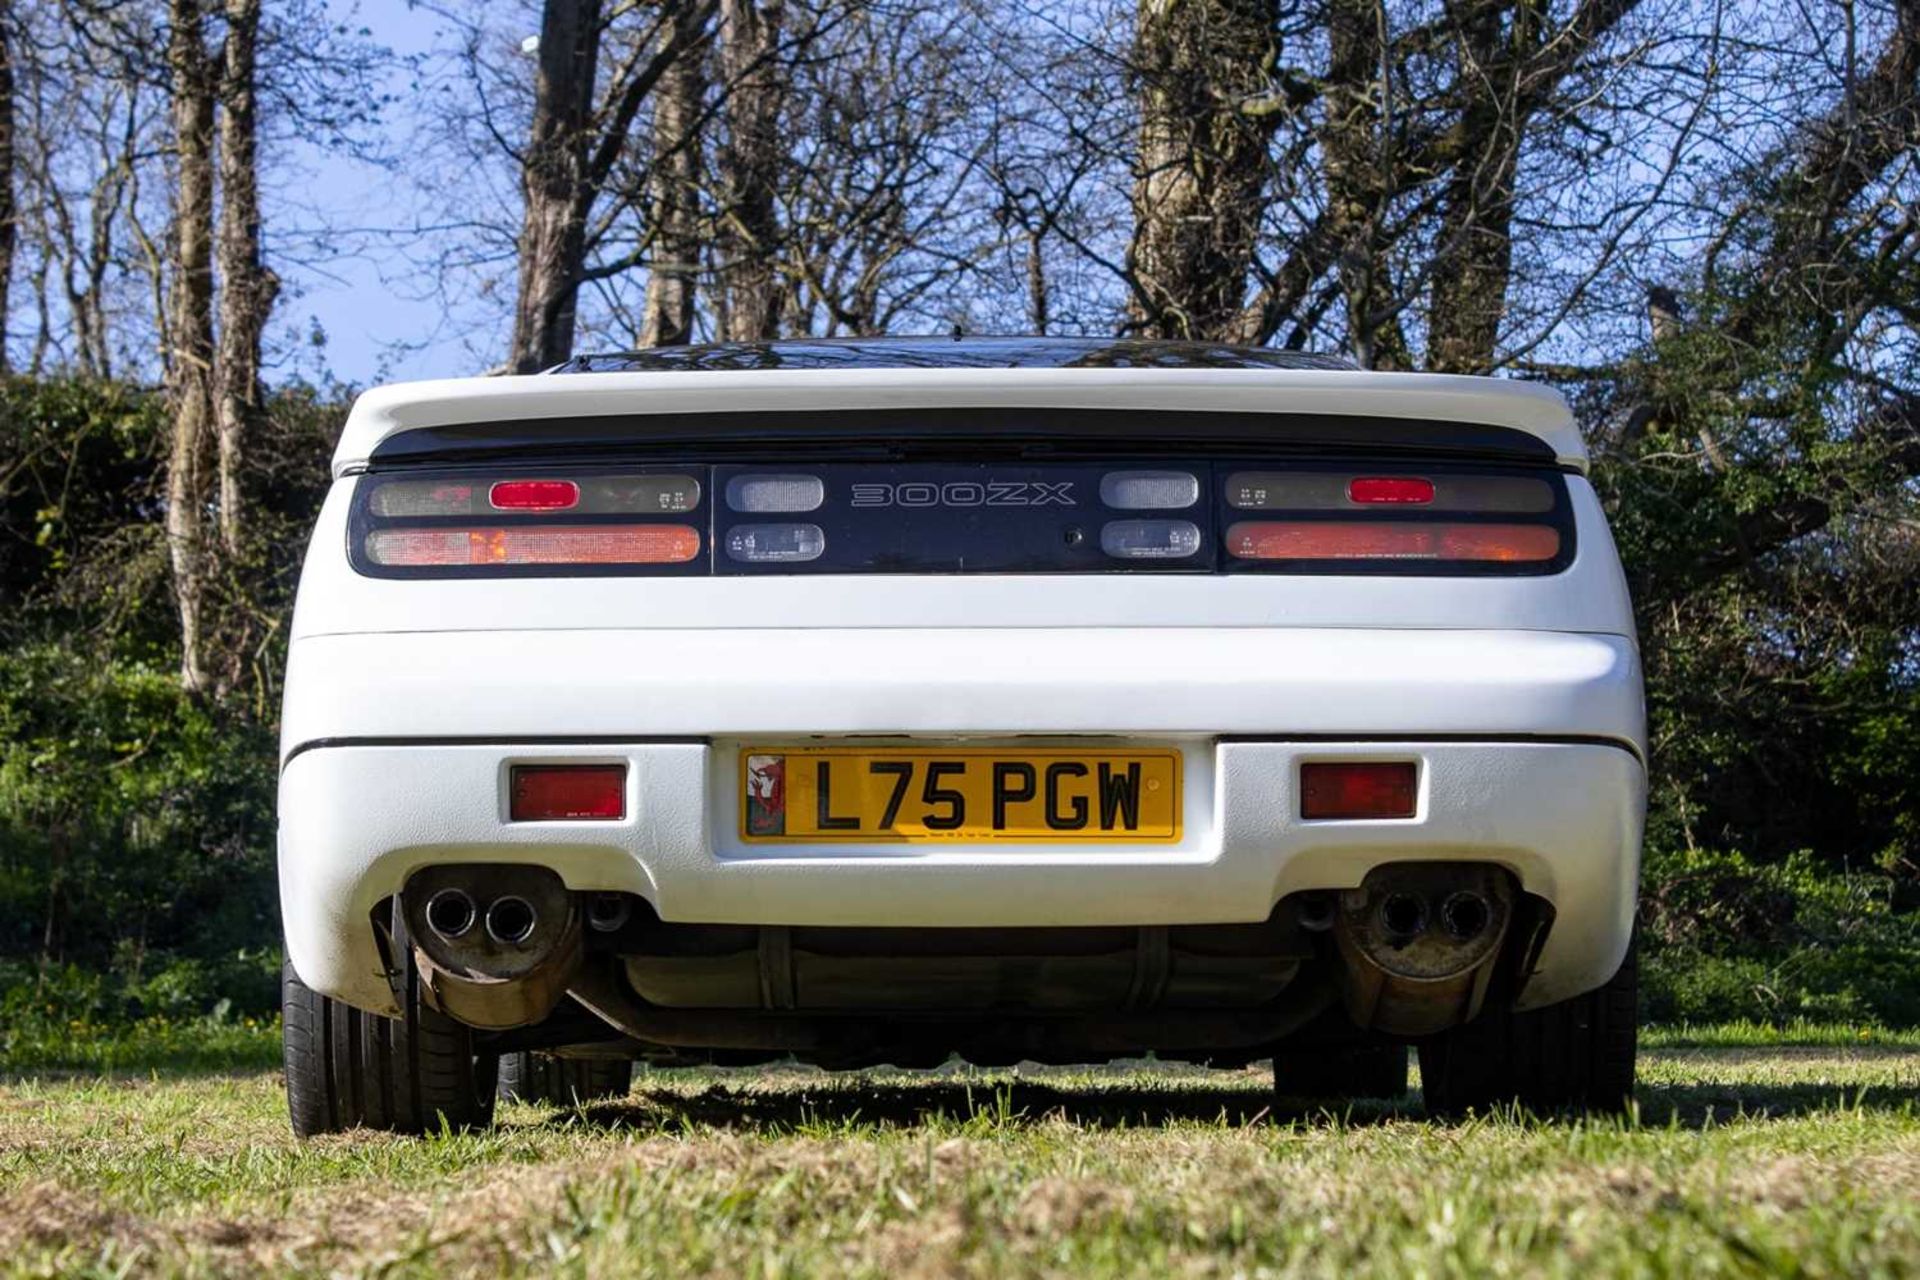 1990 Nissan 300ZX Turbo 2+2 Targa One of the last examples registered in the UK - Image 12 of 89